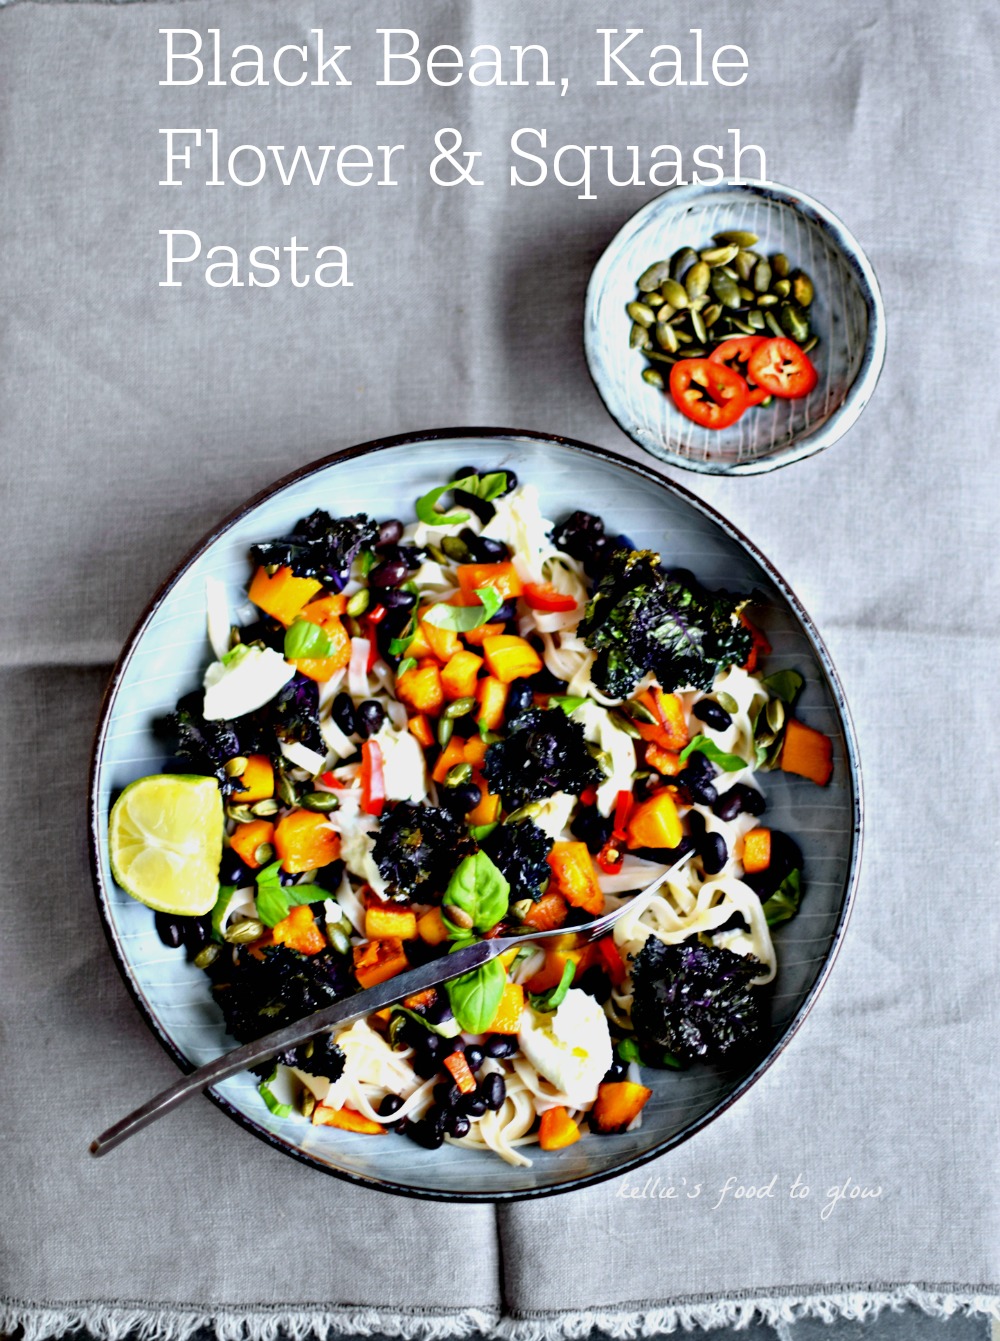 This hearty yet light pasta supper is full of colour and texture, and is perfect for a midweek meal. Easily vegan and gluten-free too.